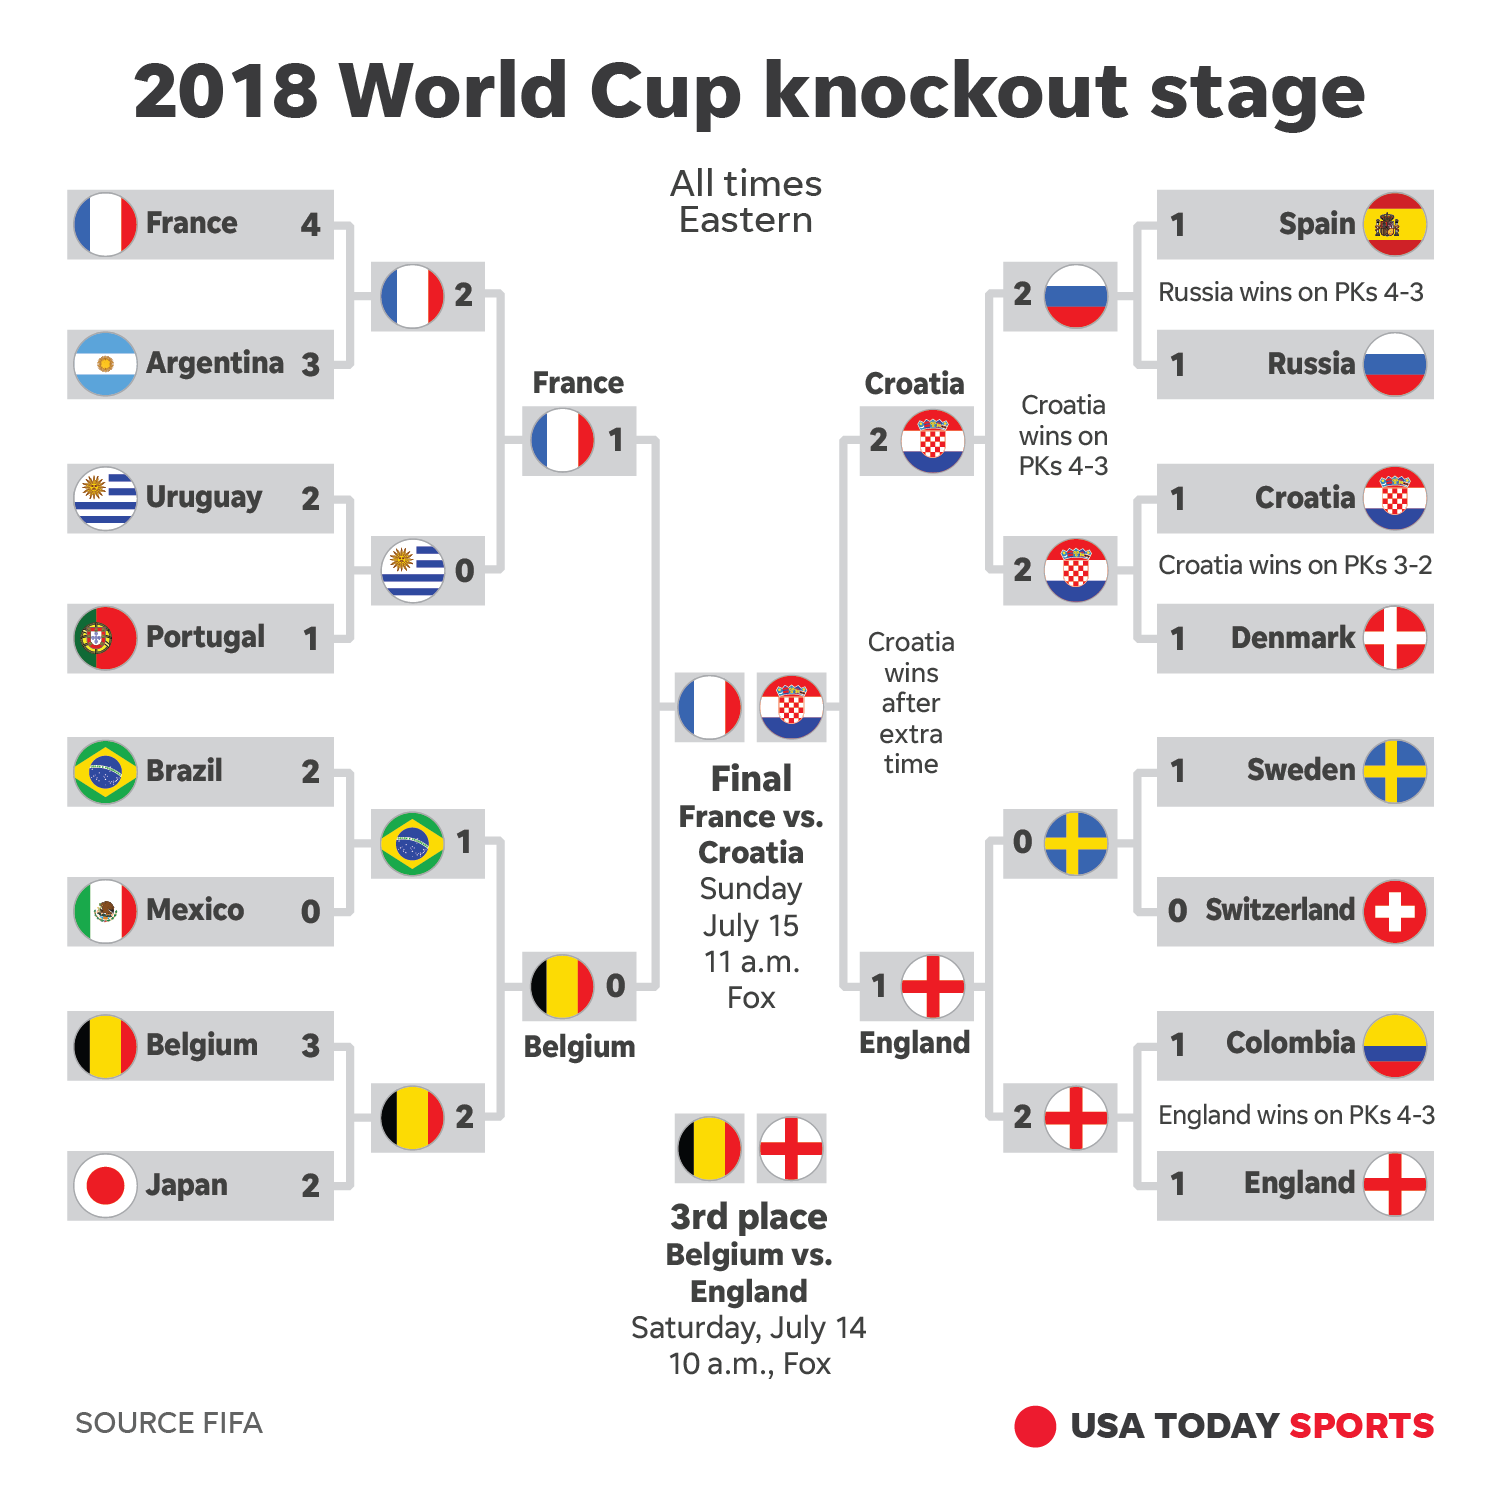 World Cup Game Schedule